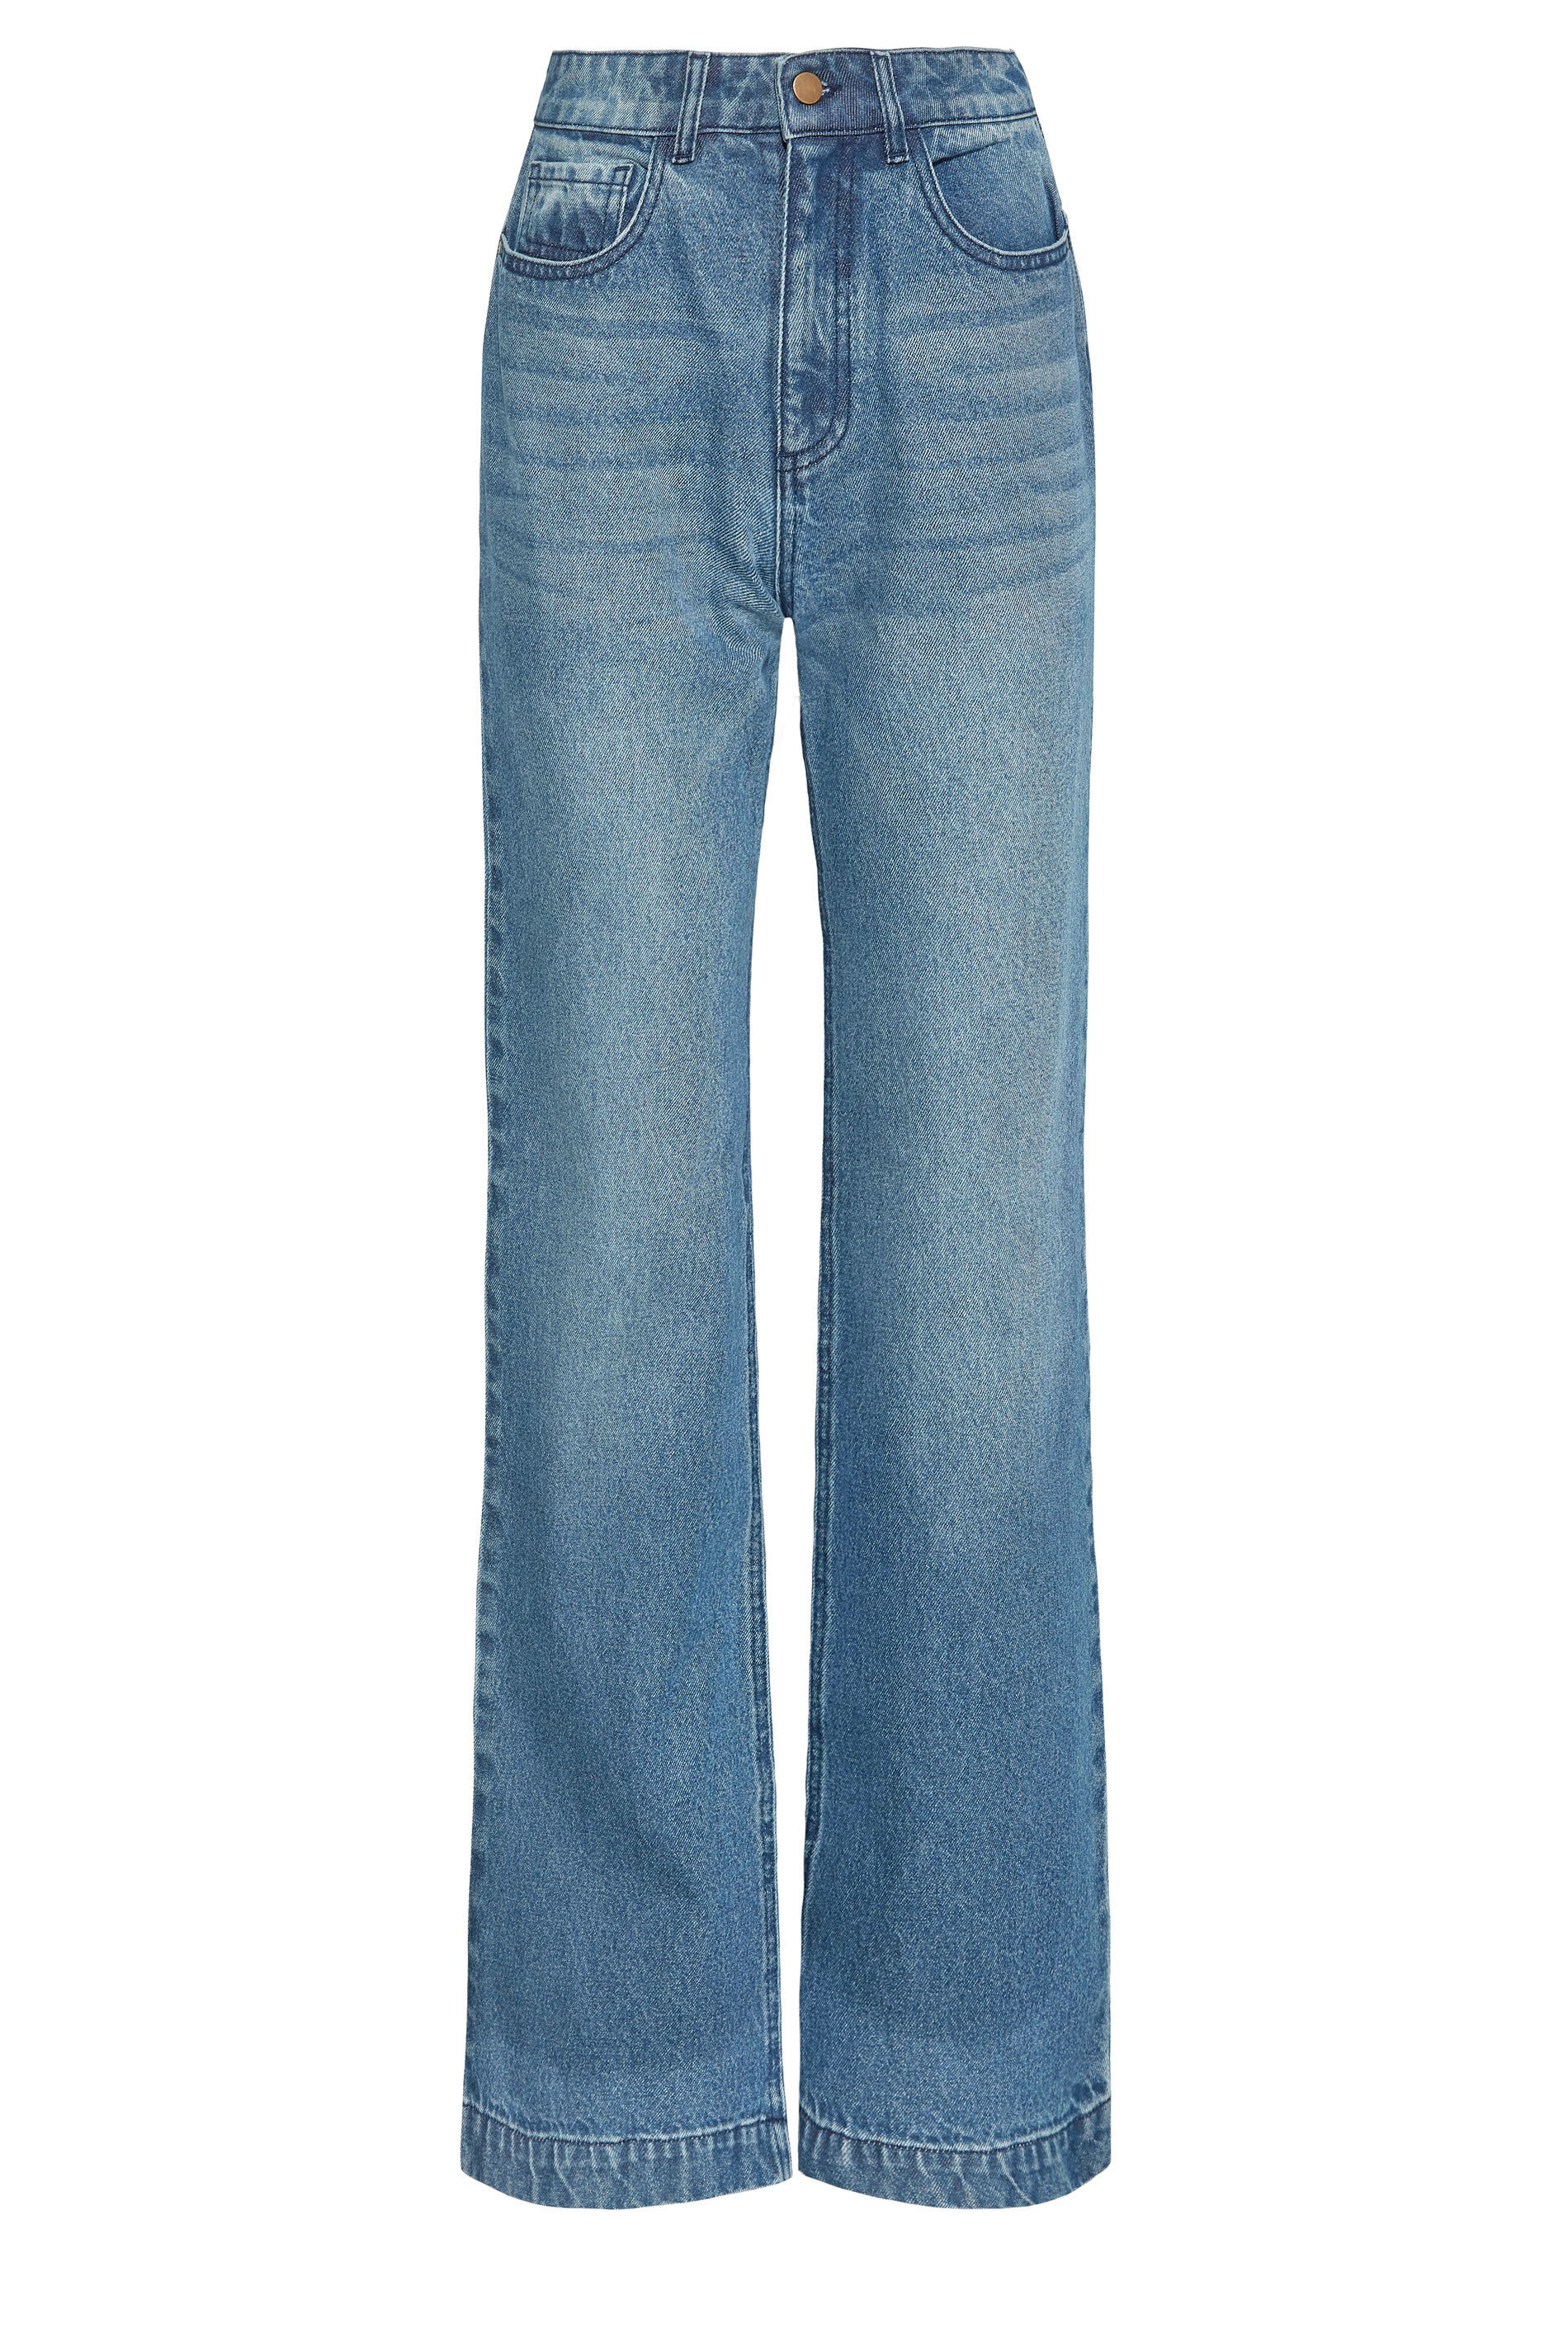 Tall Women's LTS MADE FOR GOOD Mid Blue Wide Leg Jeans | Long Tall Sally